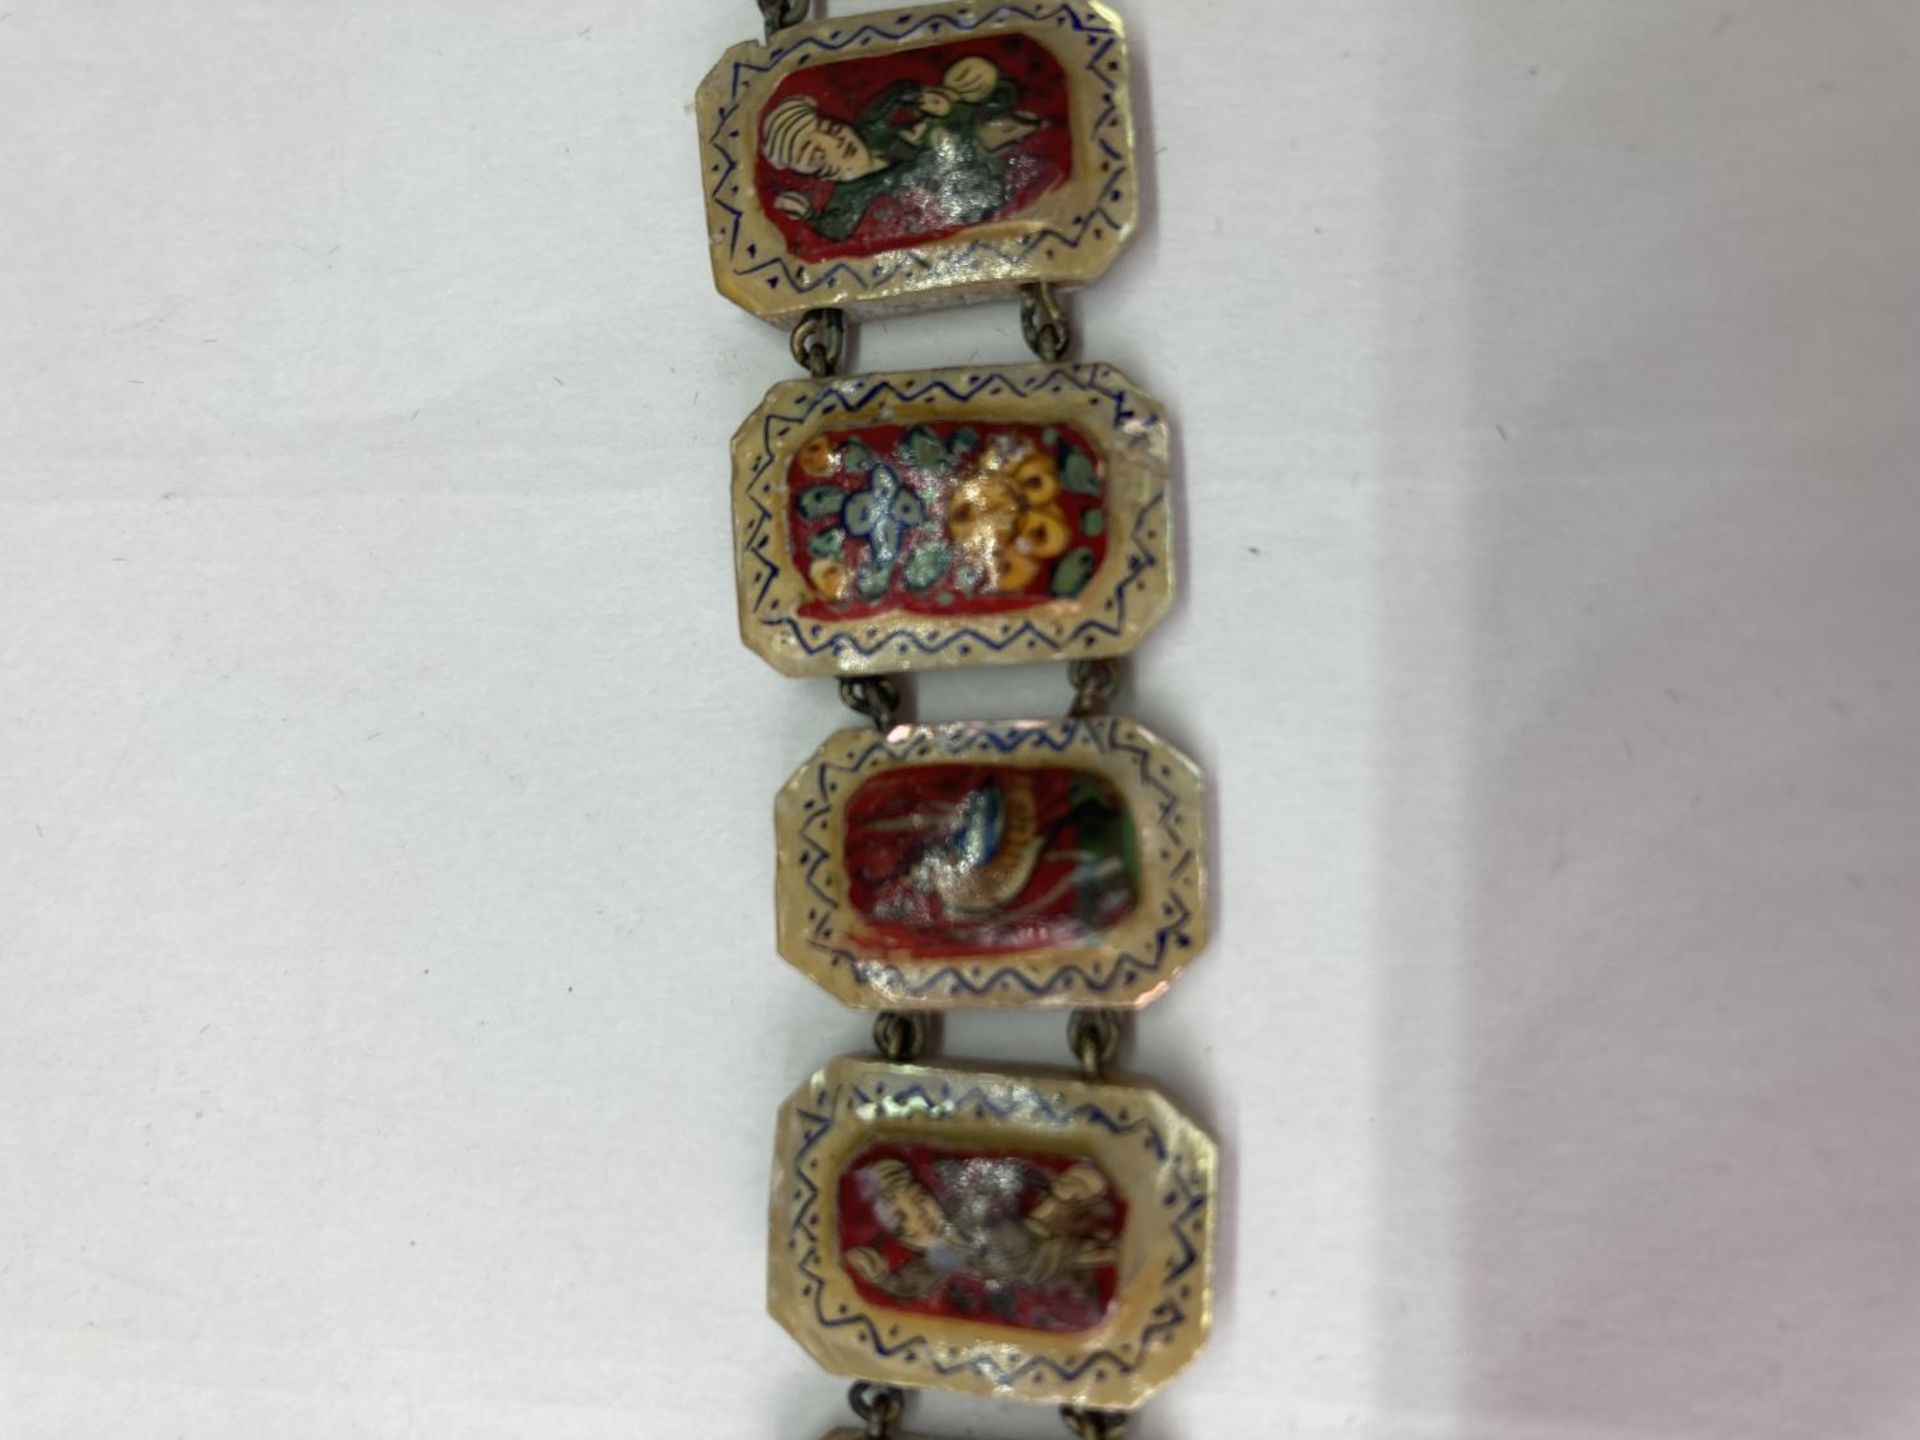 A DECORATIVE HAND PAINTED PERSIAN MOTHER OF PEARL BRACELET IN A PRESENTATION BOX - Image 7 of 12